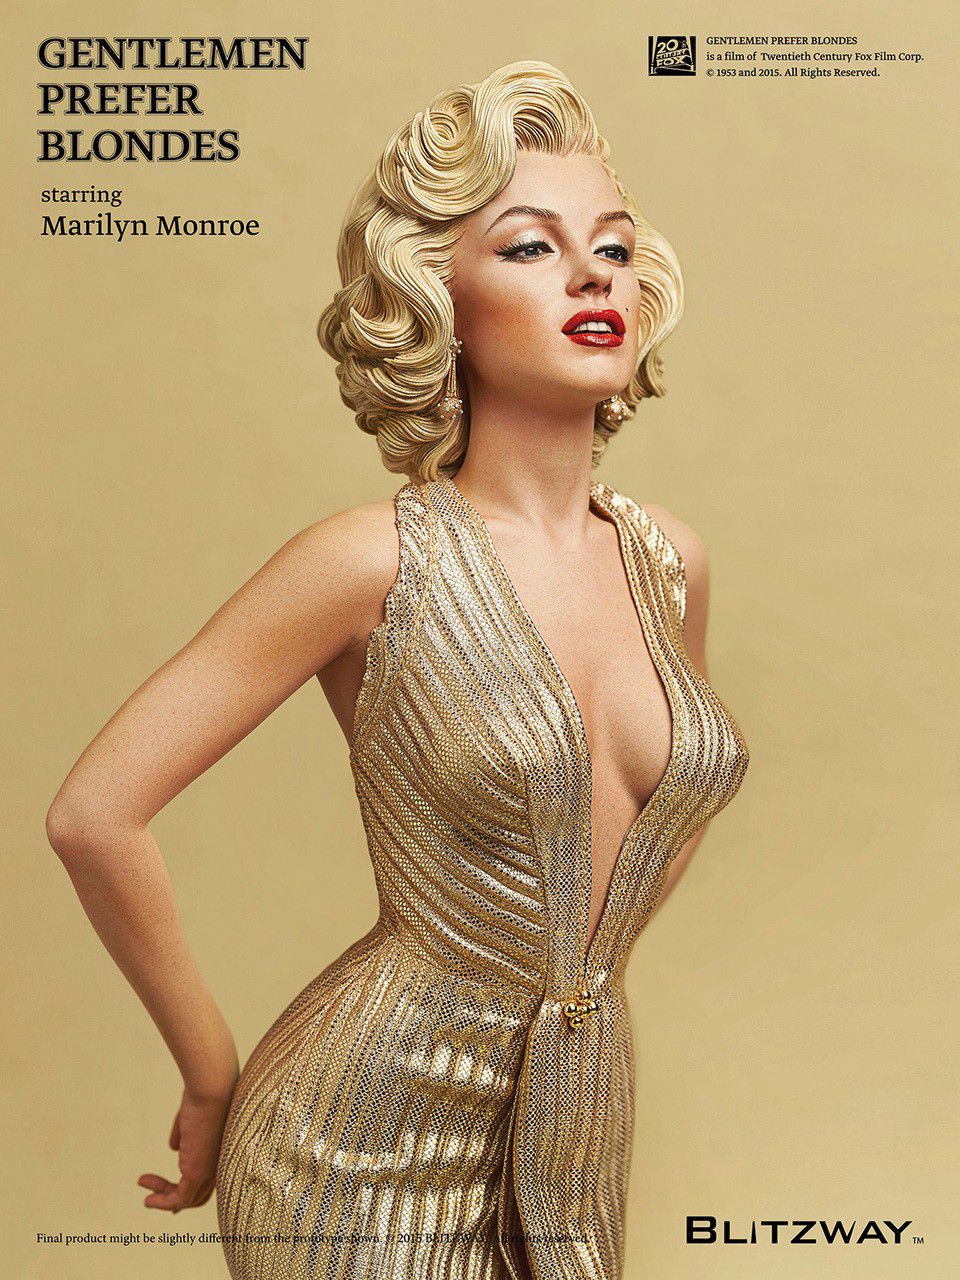 Extremely rare Japanese import blitzway marilyn Monroe statue. Sideshow collectibles gentlemen prefer blonds movie figure